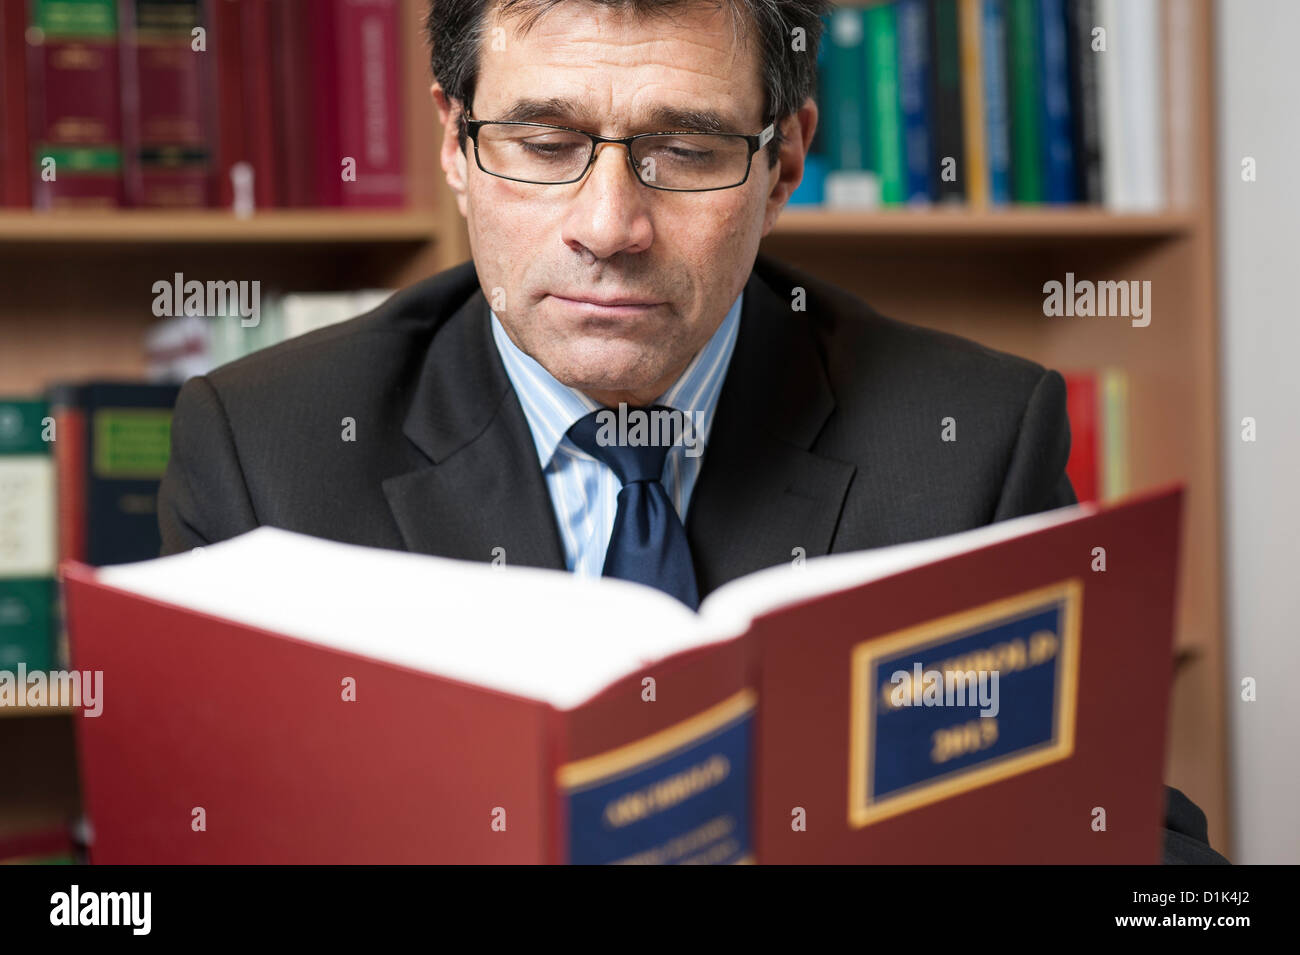 Environmental corporate portrait of solicitor, lawyer, attorney reading Archbold 2013 law book in his office. Stock Photo